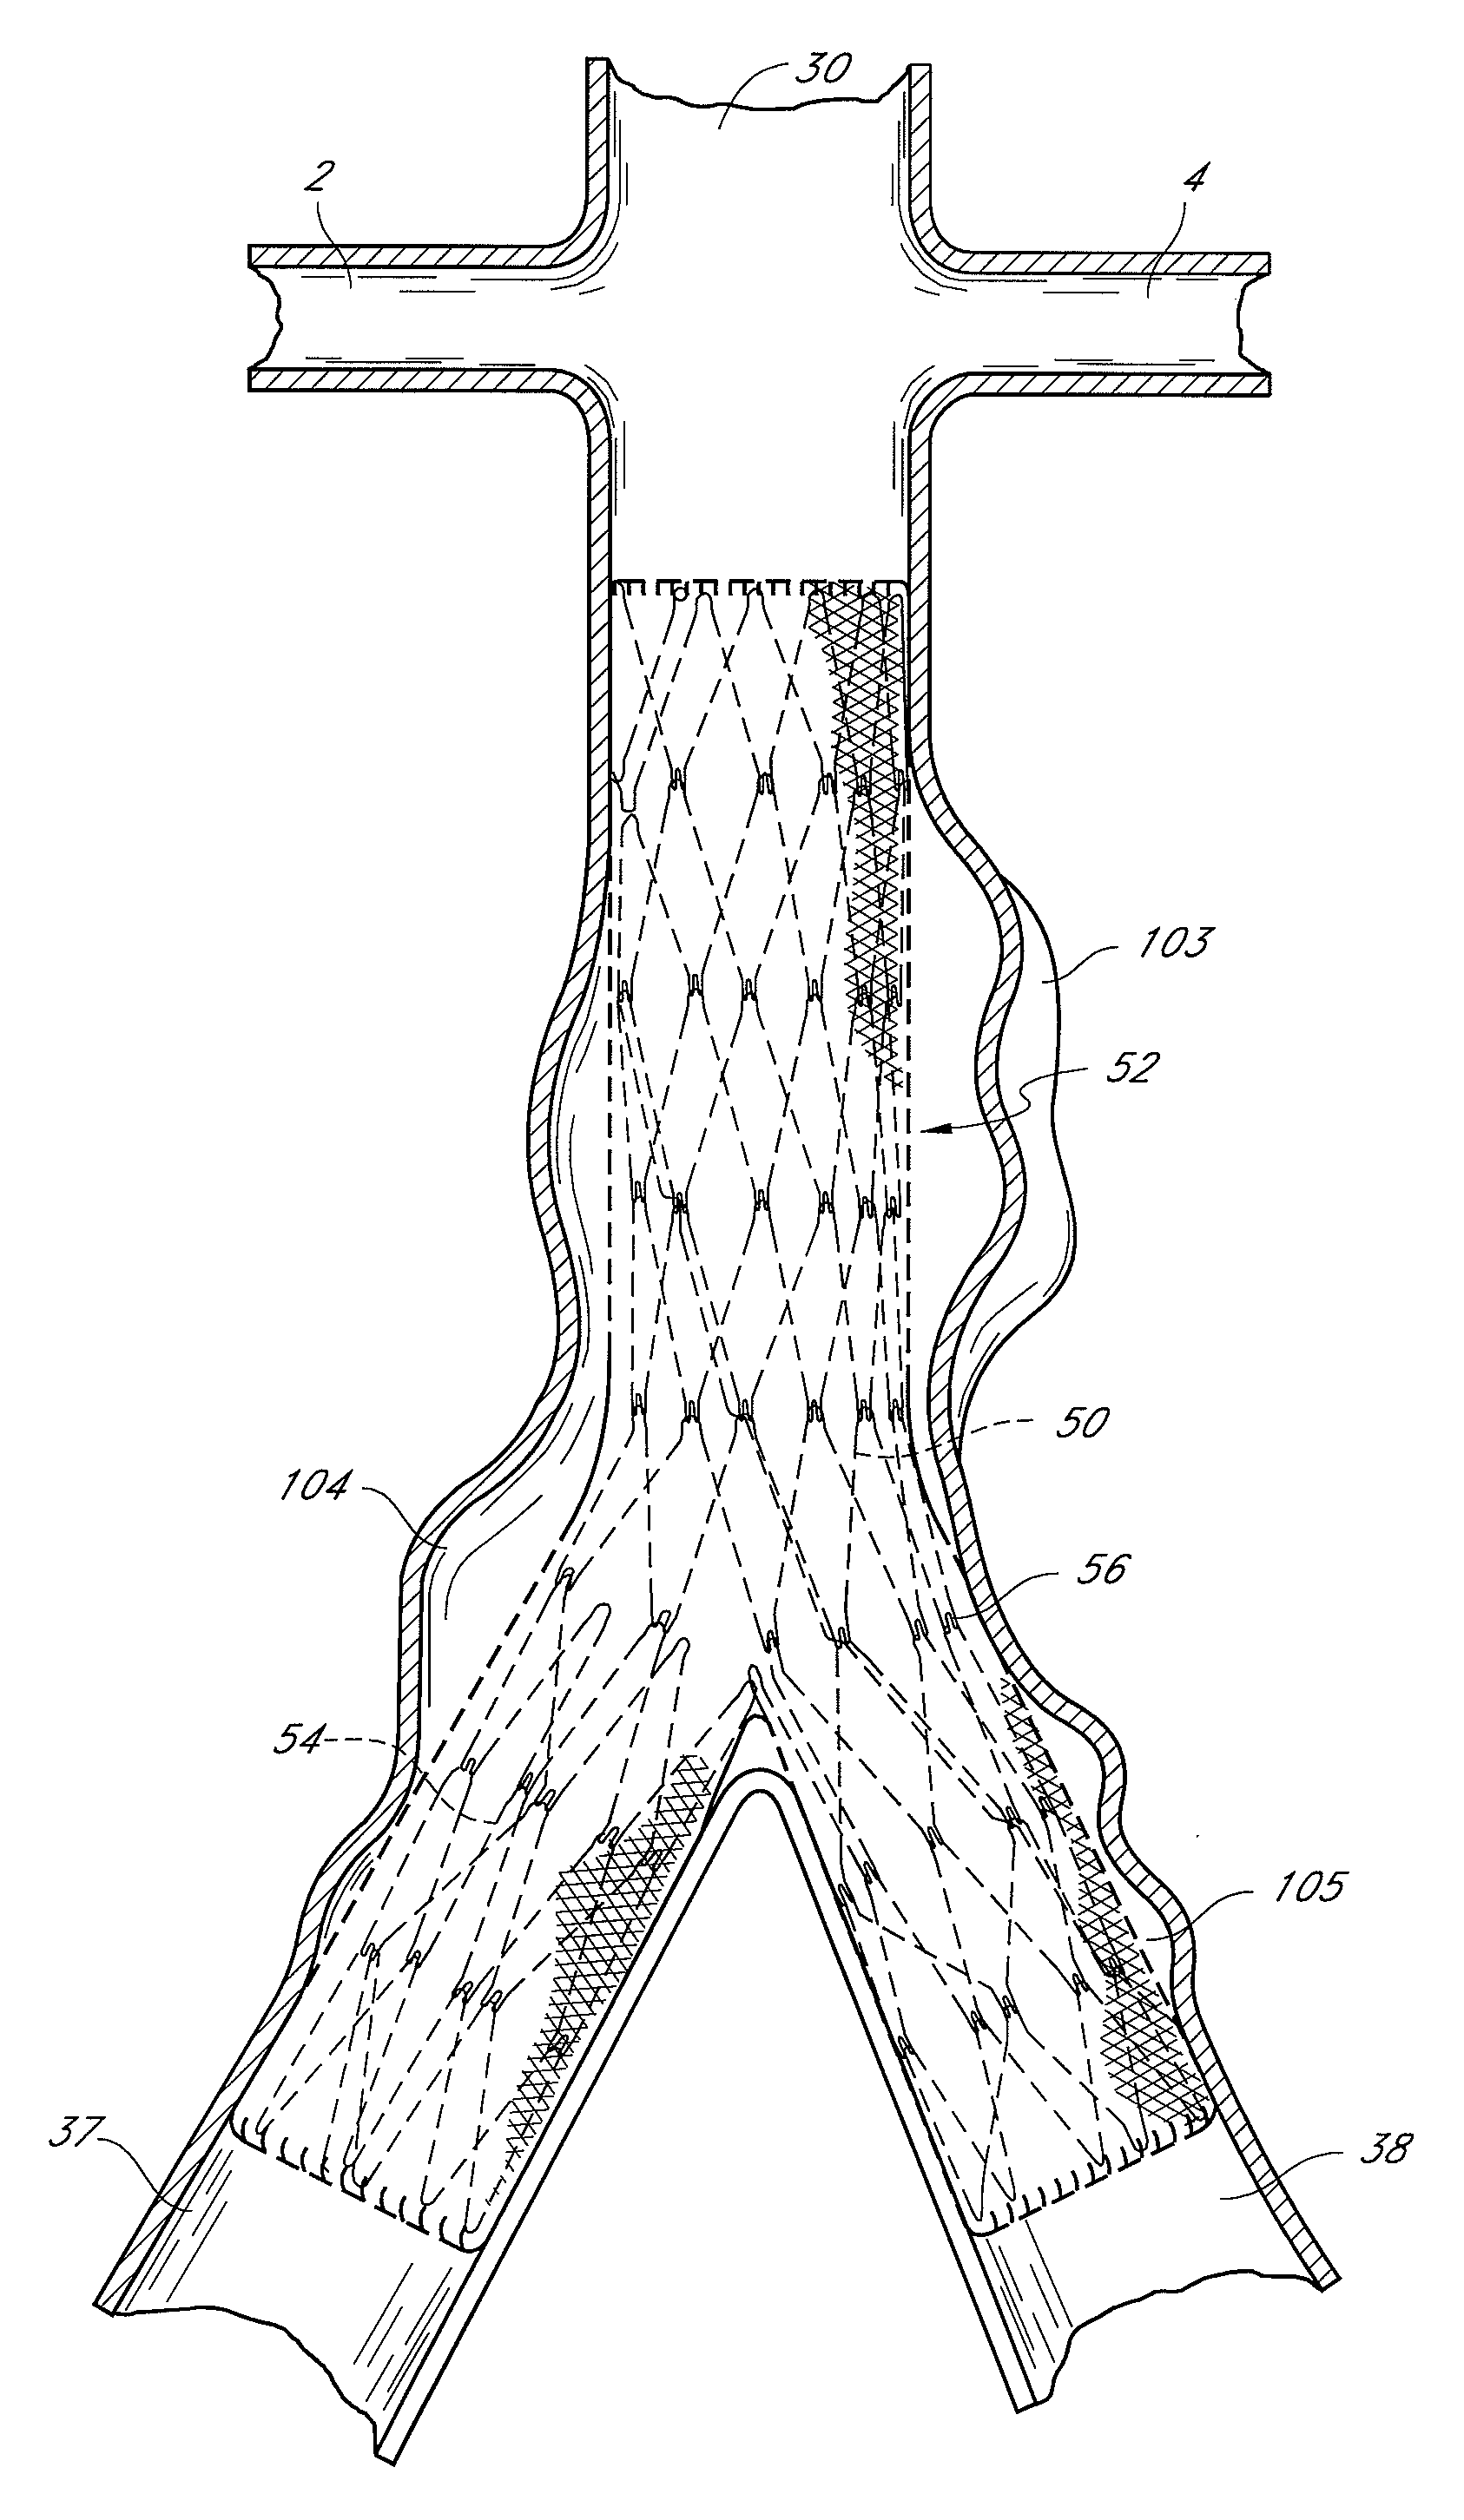 Dual concentric guidewire and methods of bifurcated graft deployment